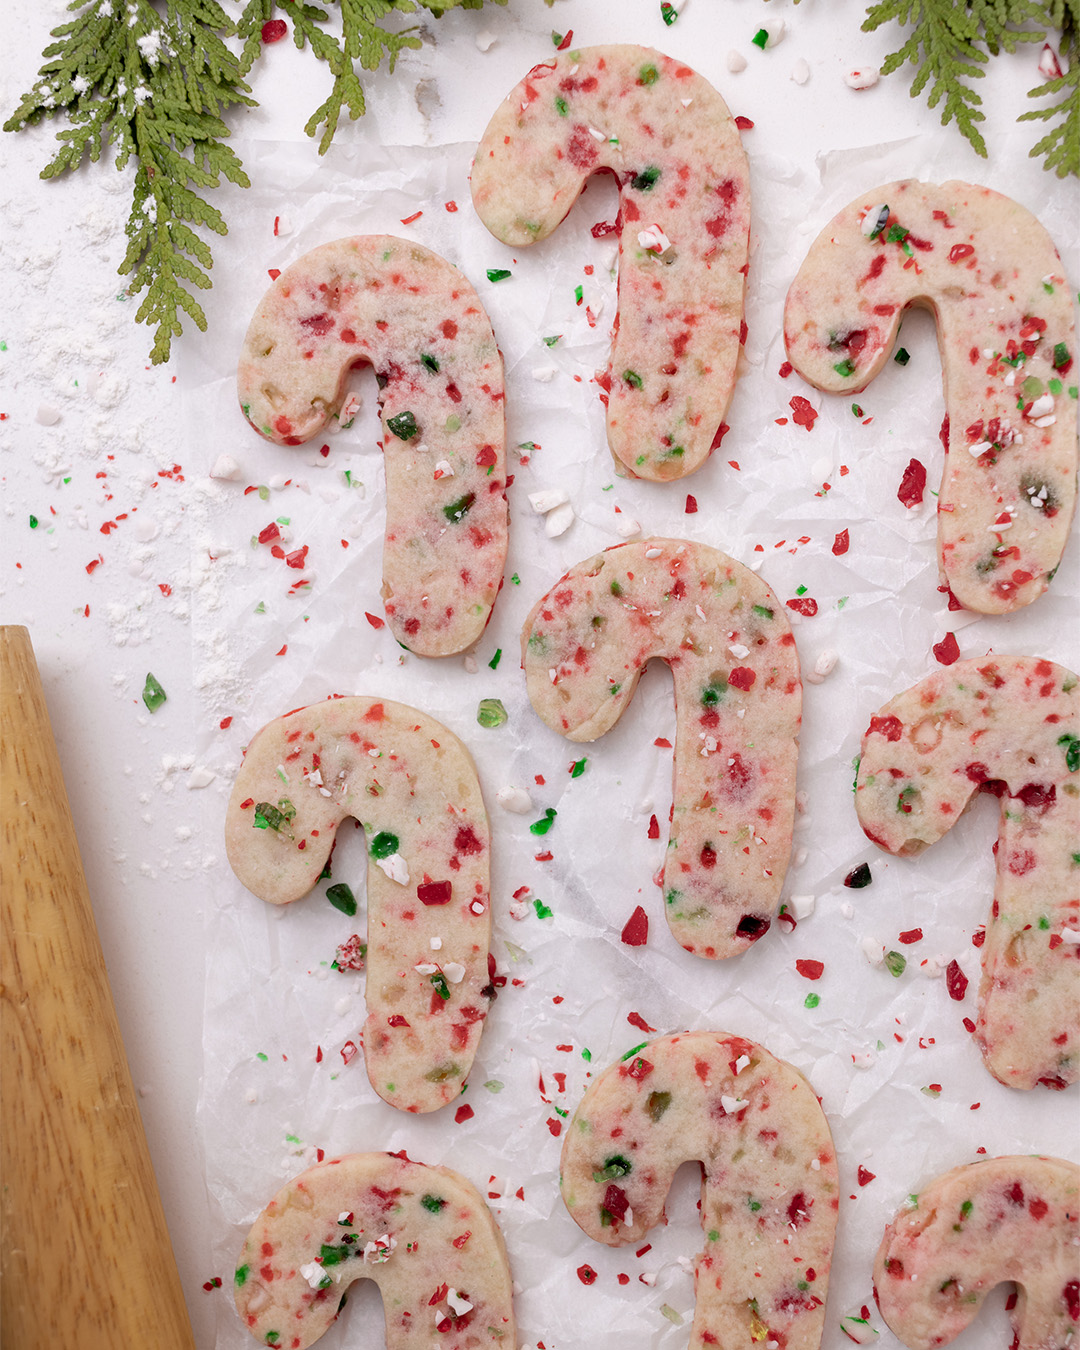 These candy cane shortbread cookies are a super easy, super festive cookie and they'll look so fun on your Christmas cookie tray this year.